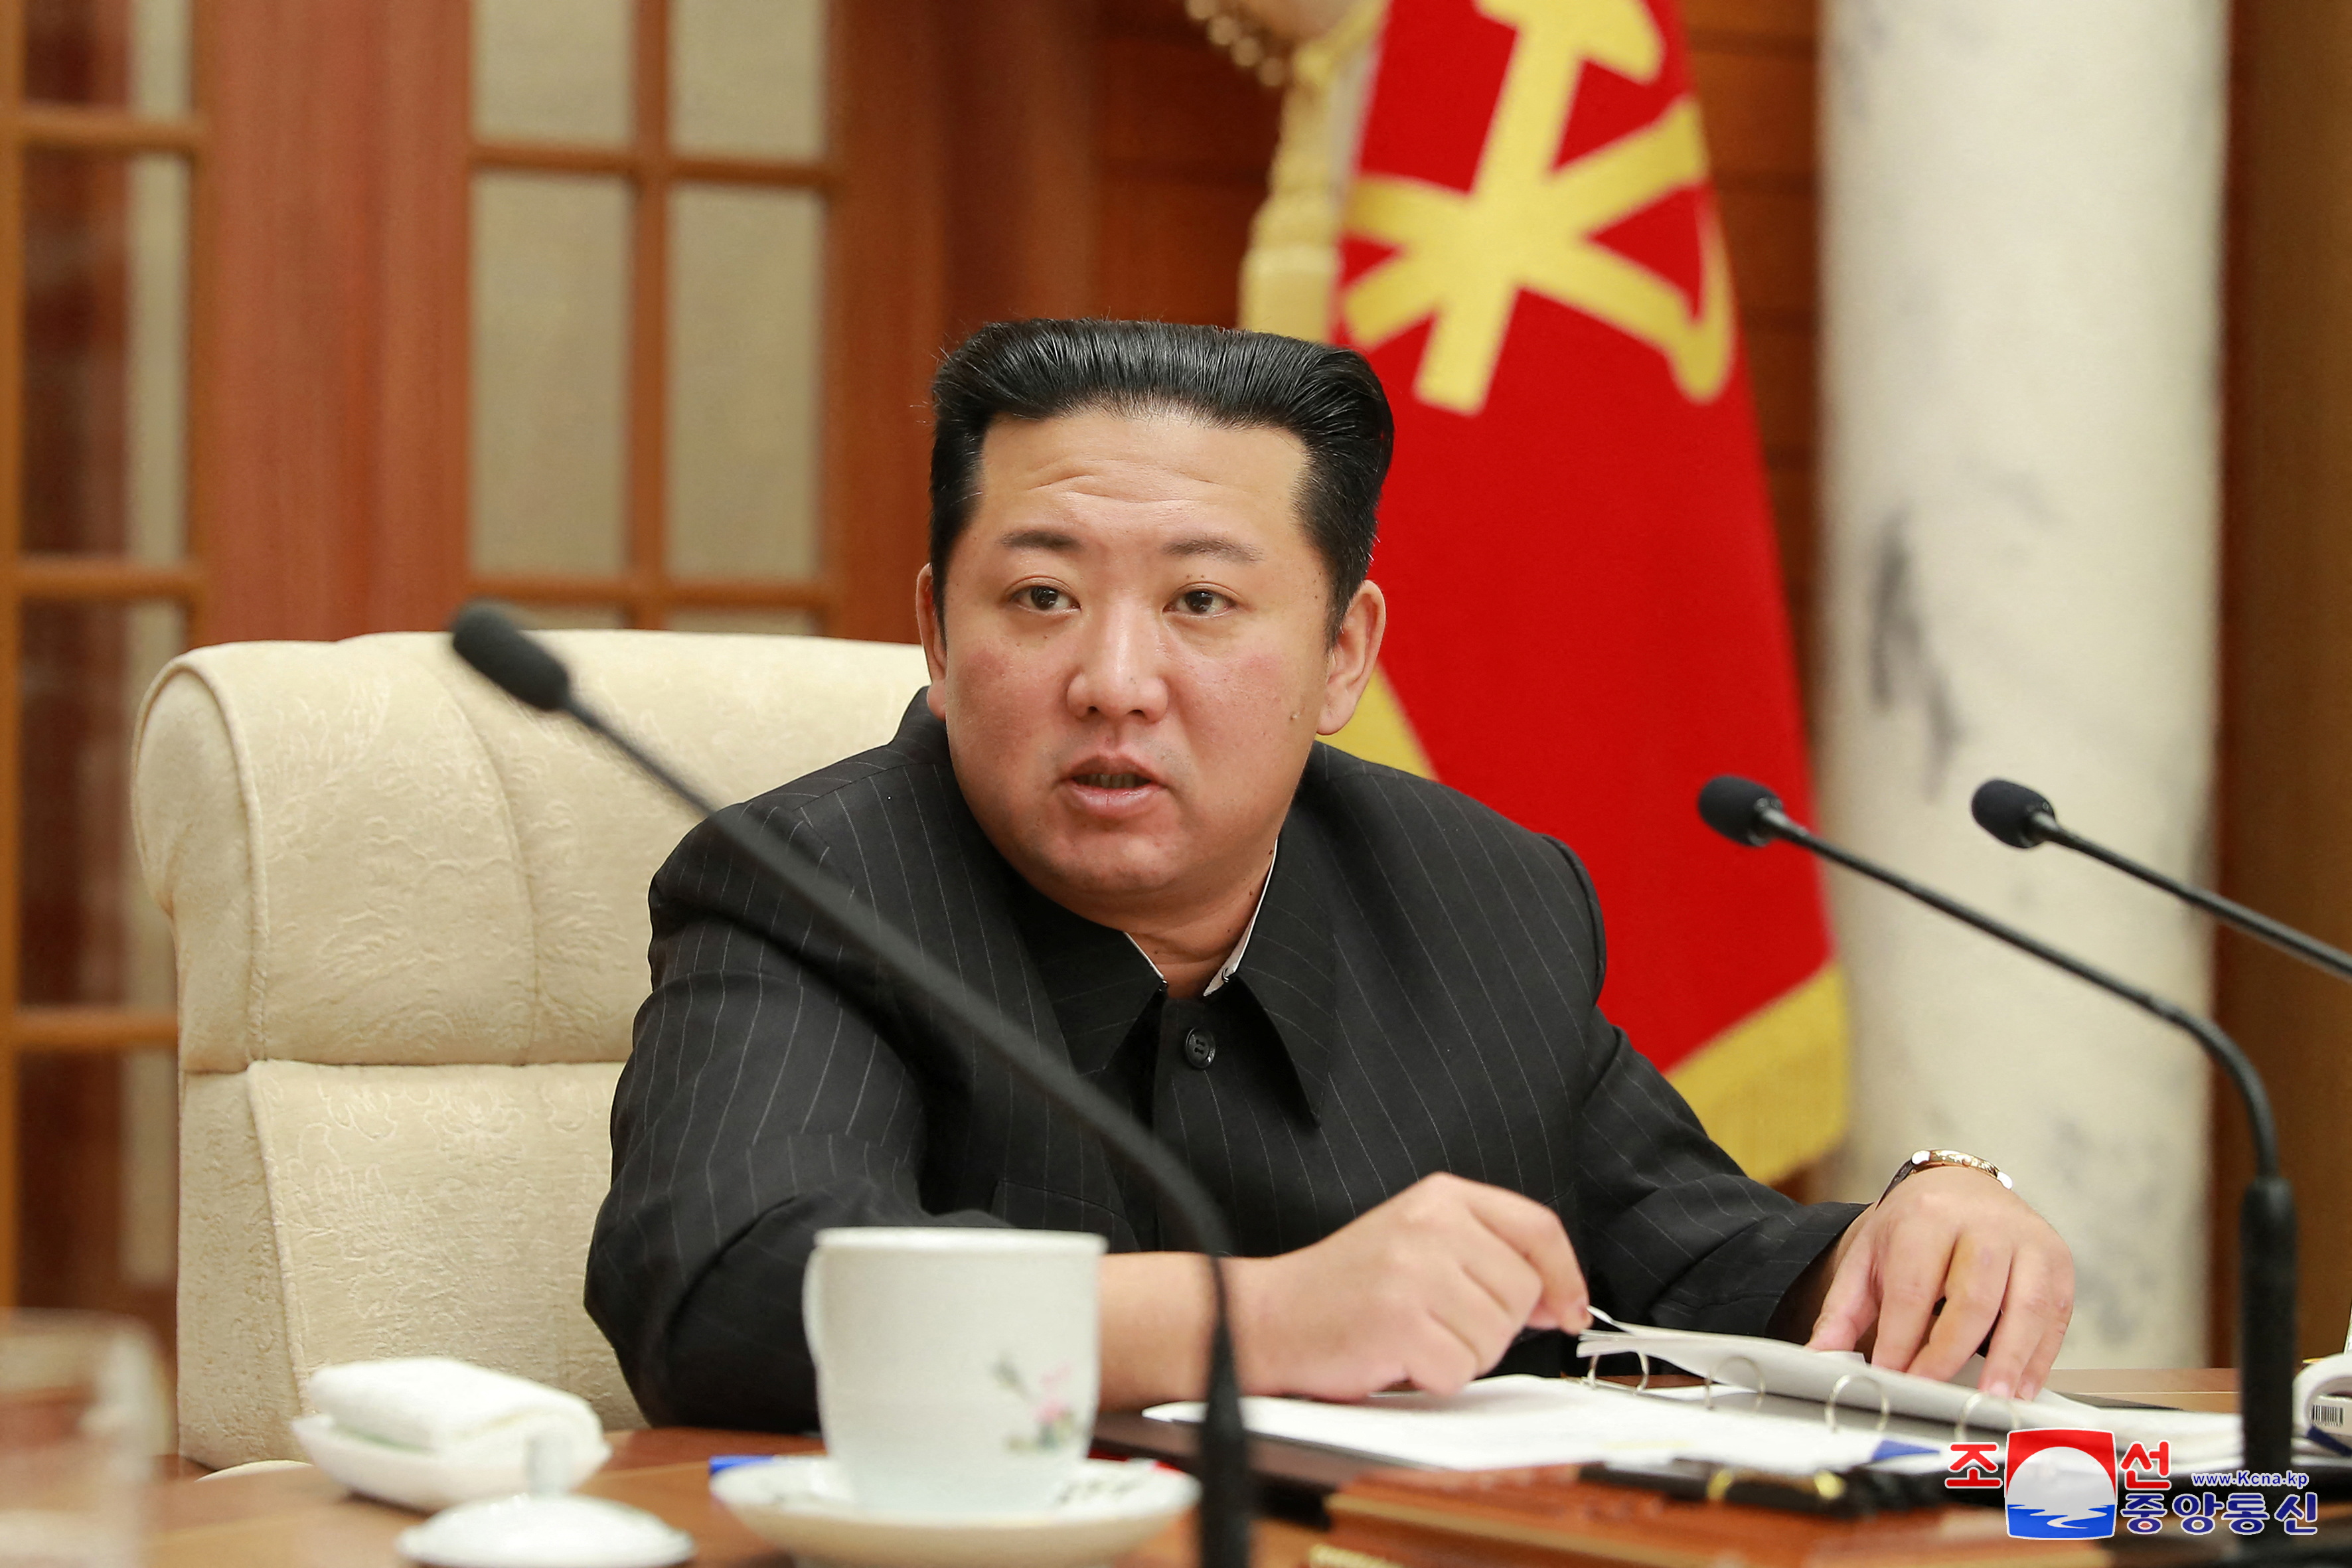 North Korean leader Kim Jong Un attends a meeting of the politburo of the ruling Workers' Party in Pyongyang, North Korea, January 19, 2022 in this photo released by North Korea's Korean Central News Agency (KCNA) January 20, 2022. KCNA via REUTERS 